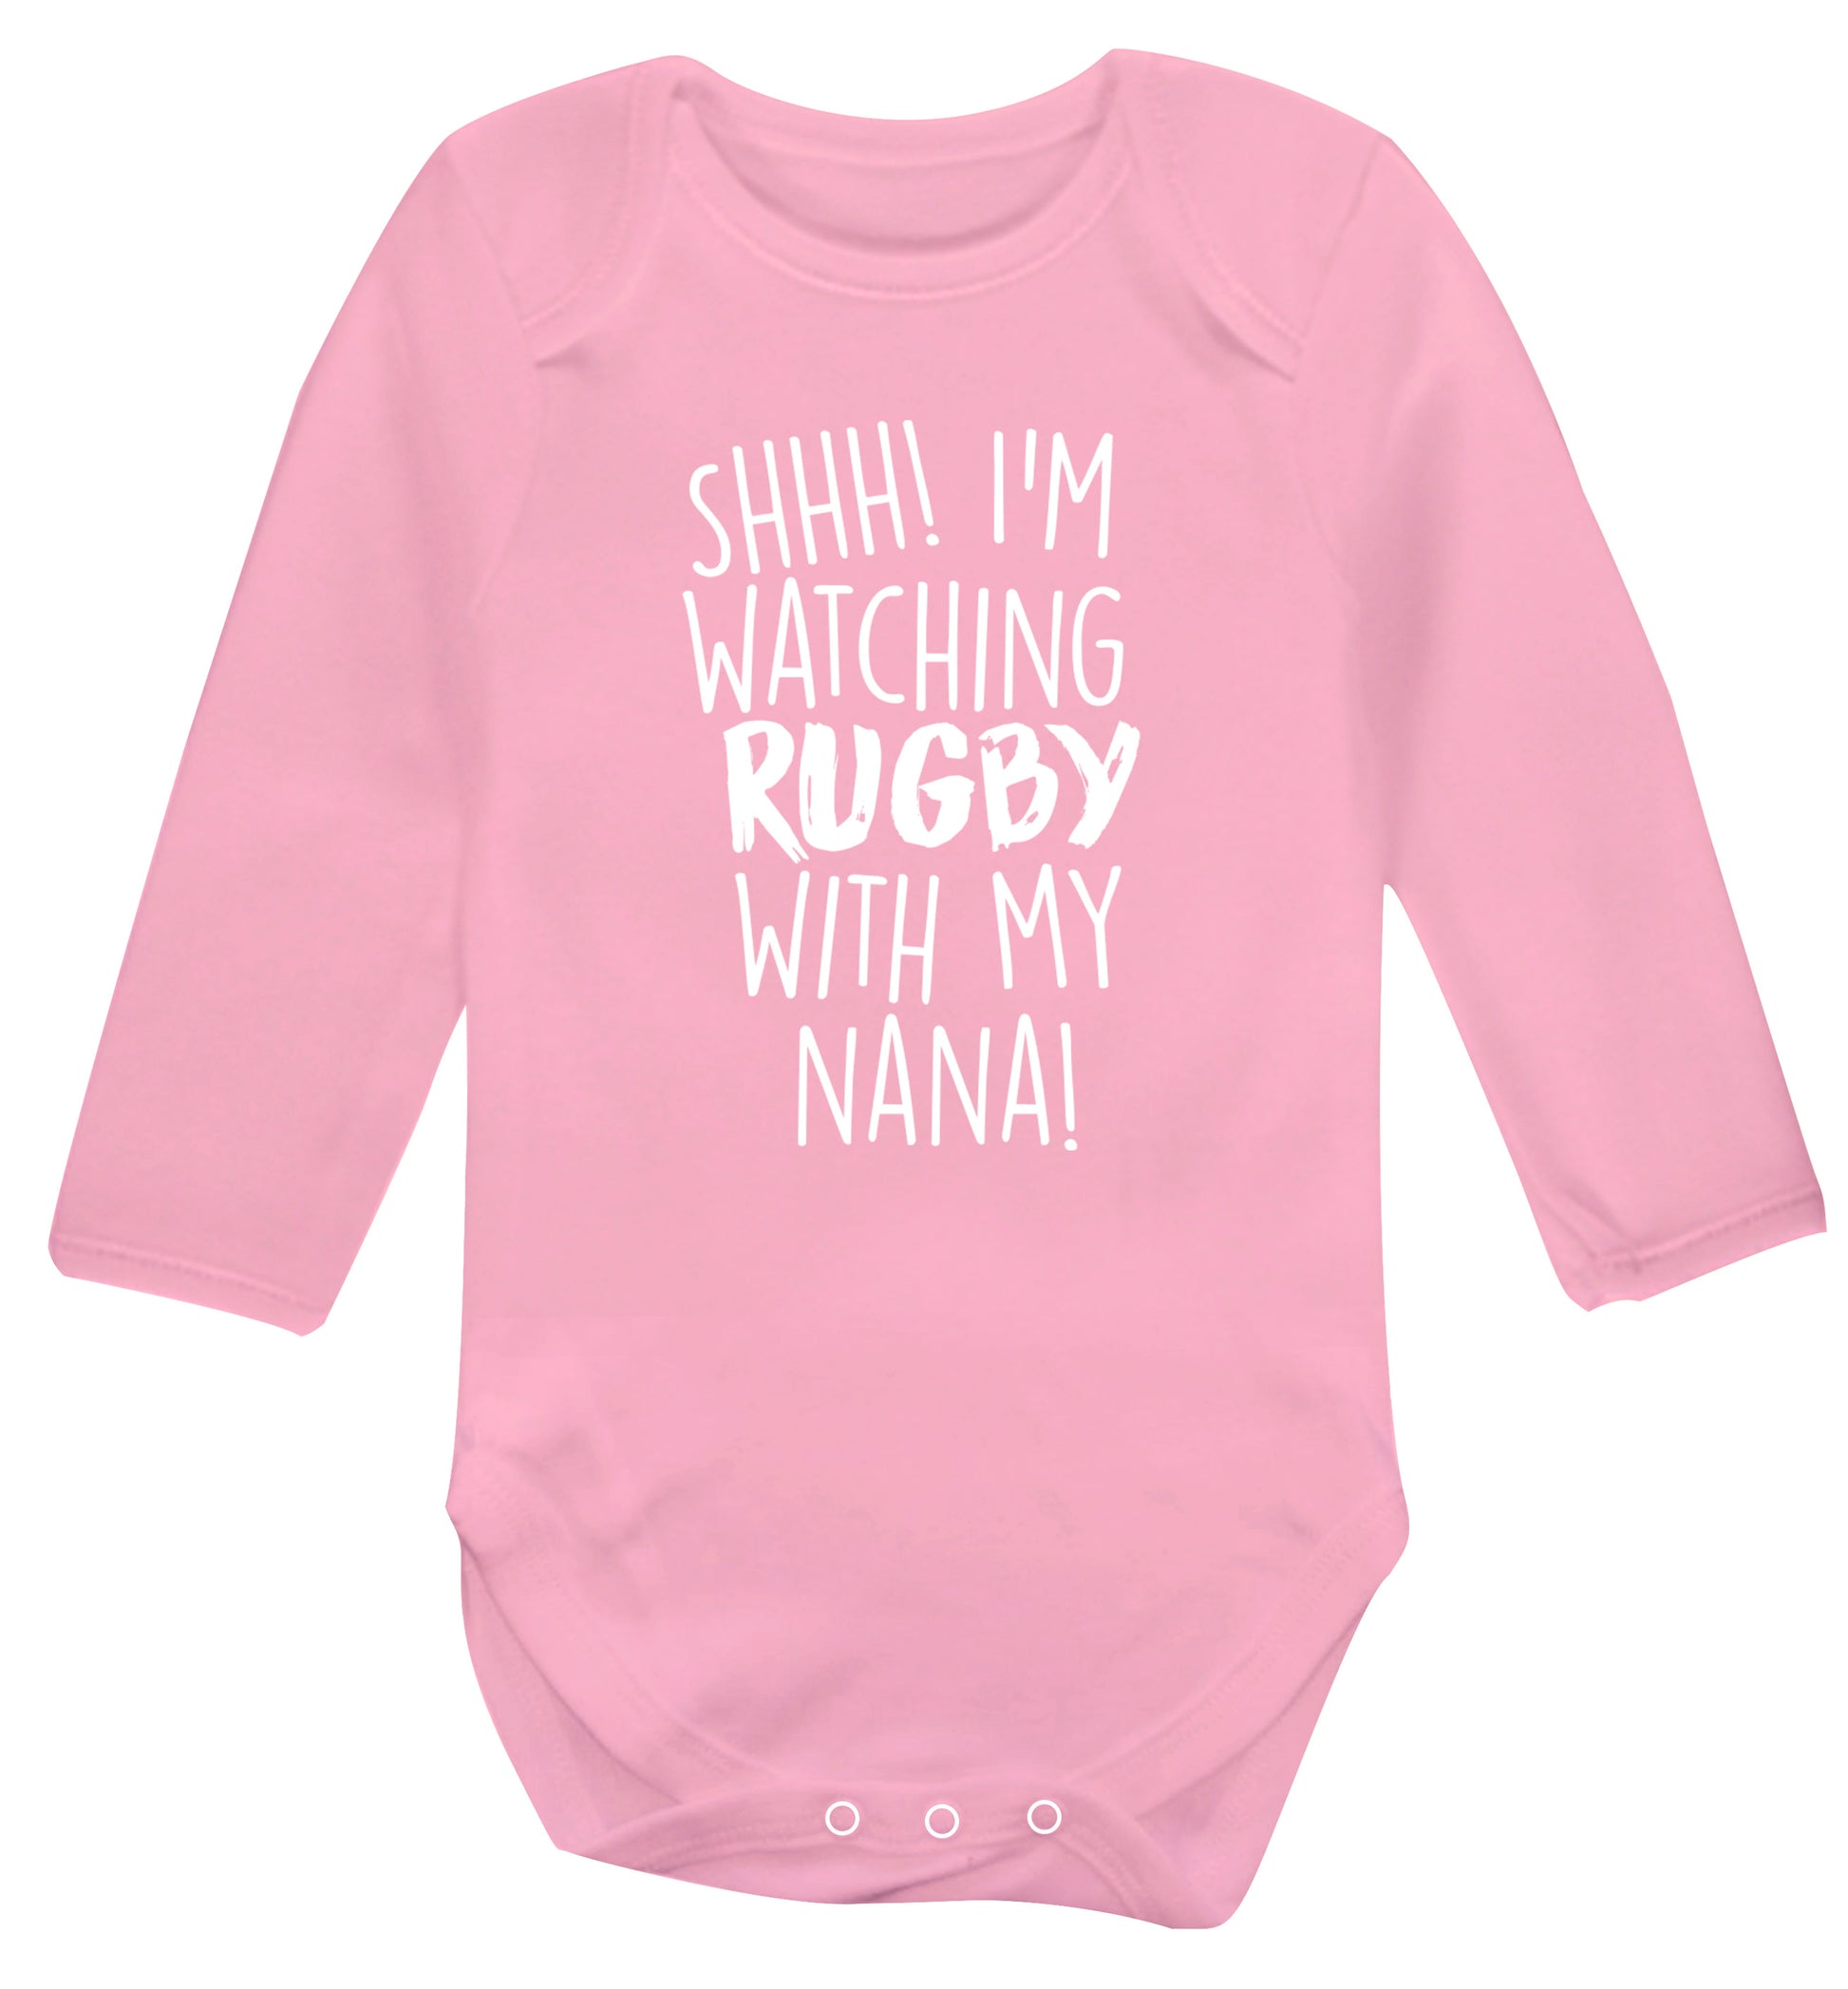 Shh I'm watching rugby with my nana Baby Vest long sleeved pale pink 6-12 months